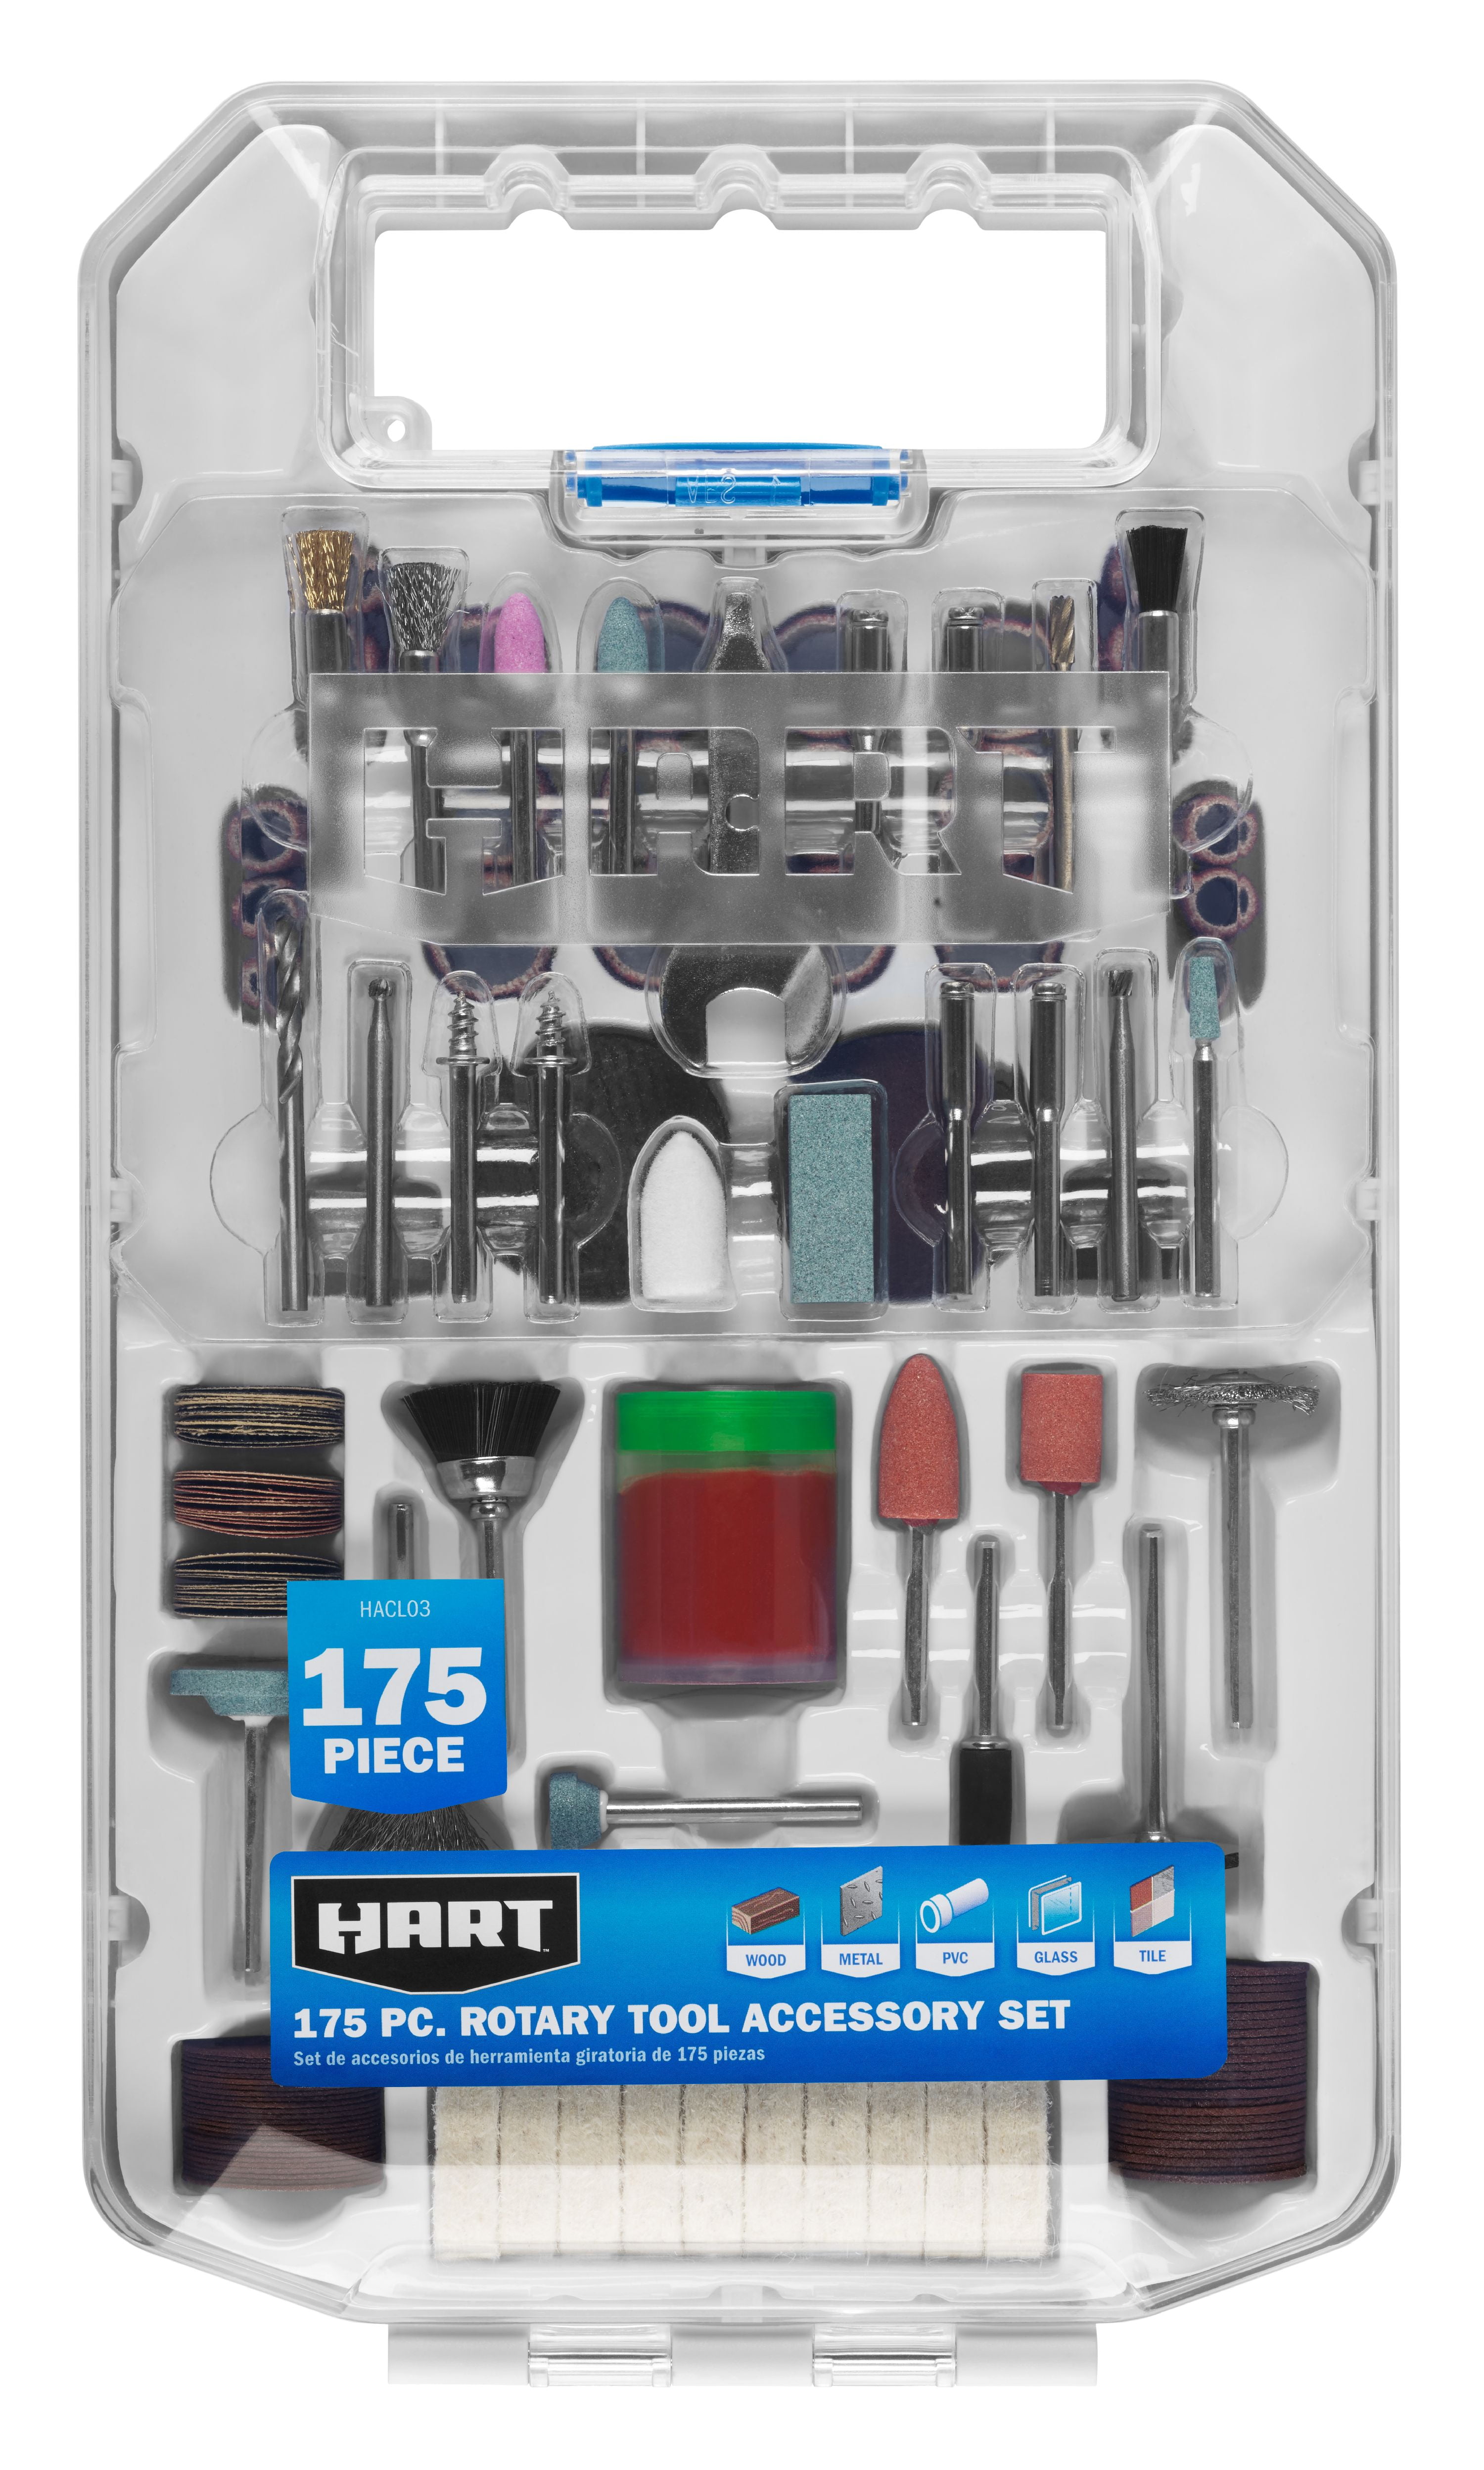 175-Piece HART Rotary Tool Accessory Set with Protective Storage Case $9.45 + Free S&H w/ Walmart+ or $35+